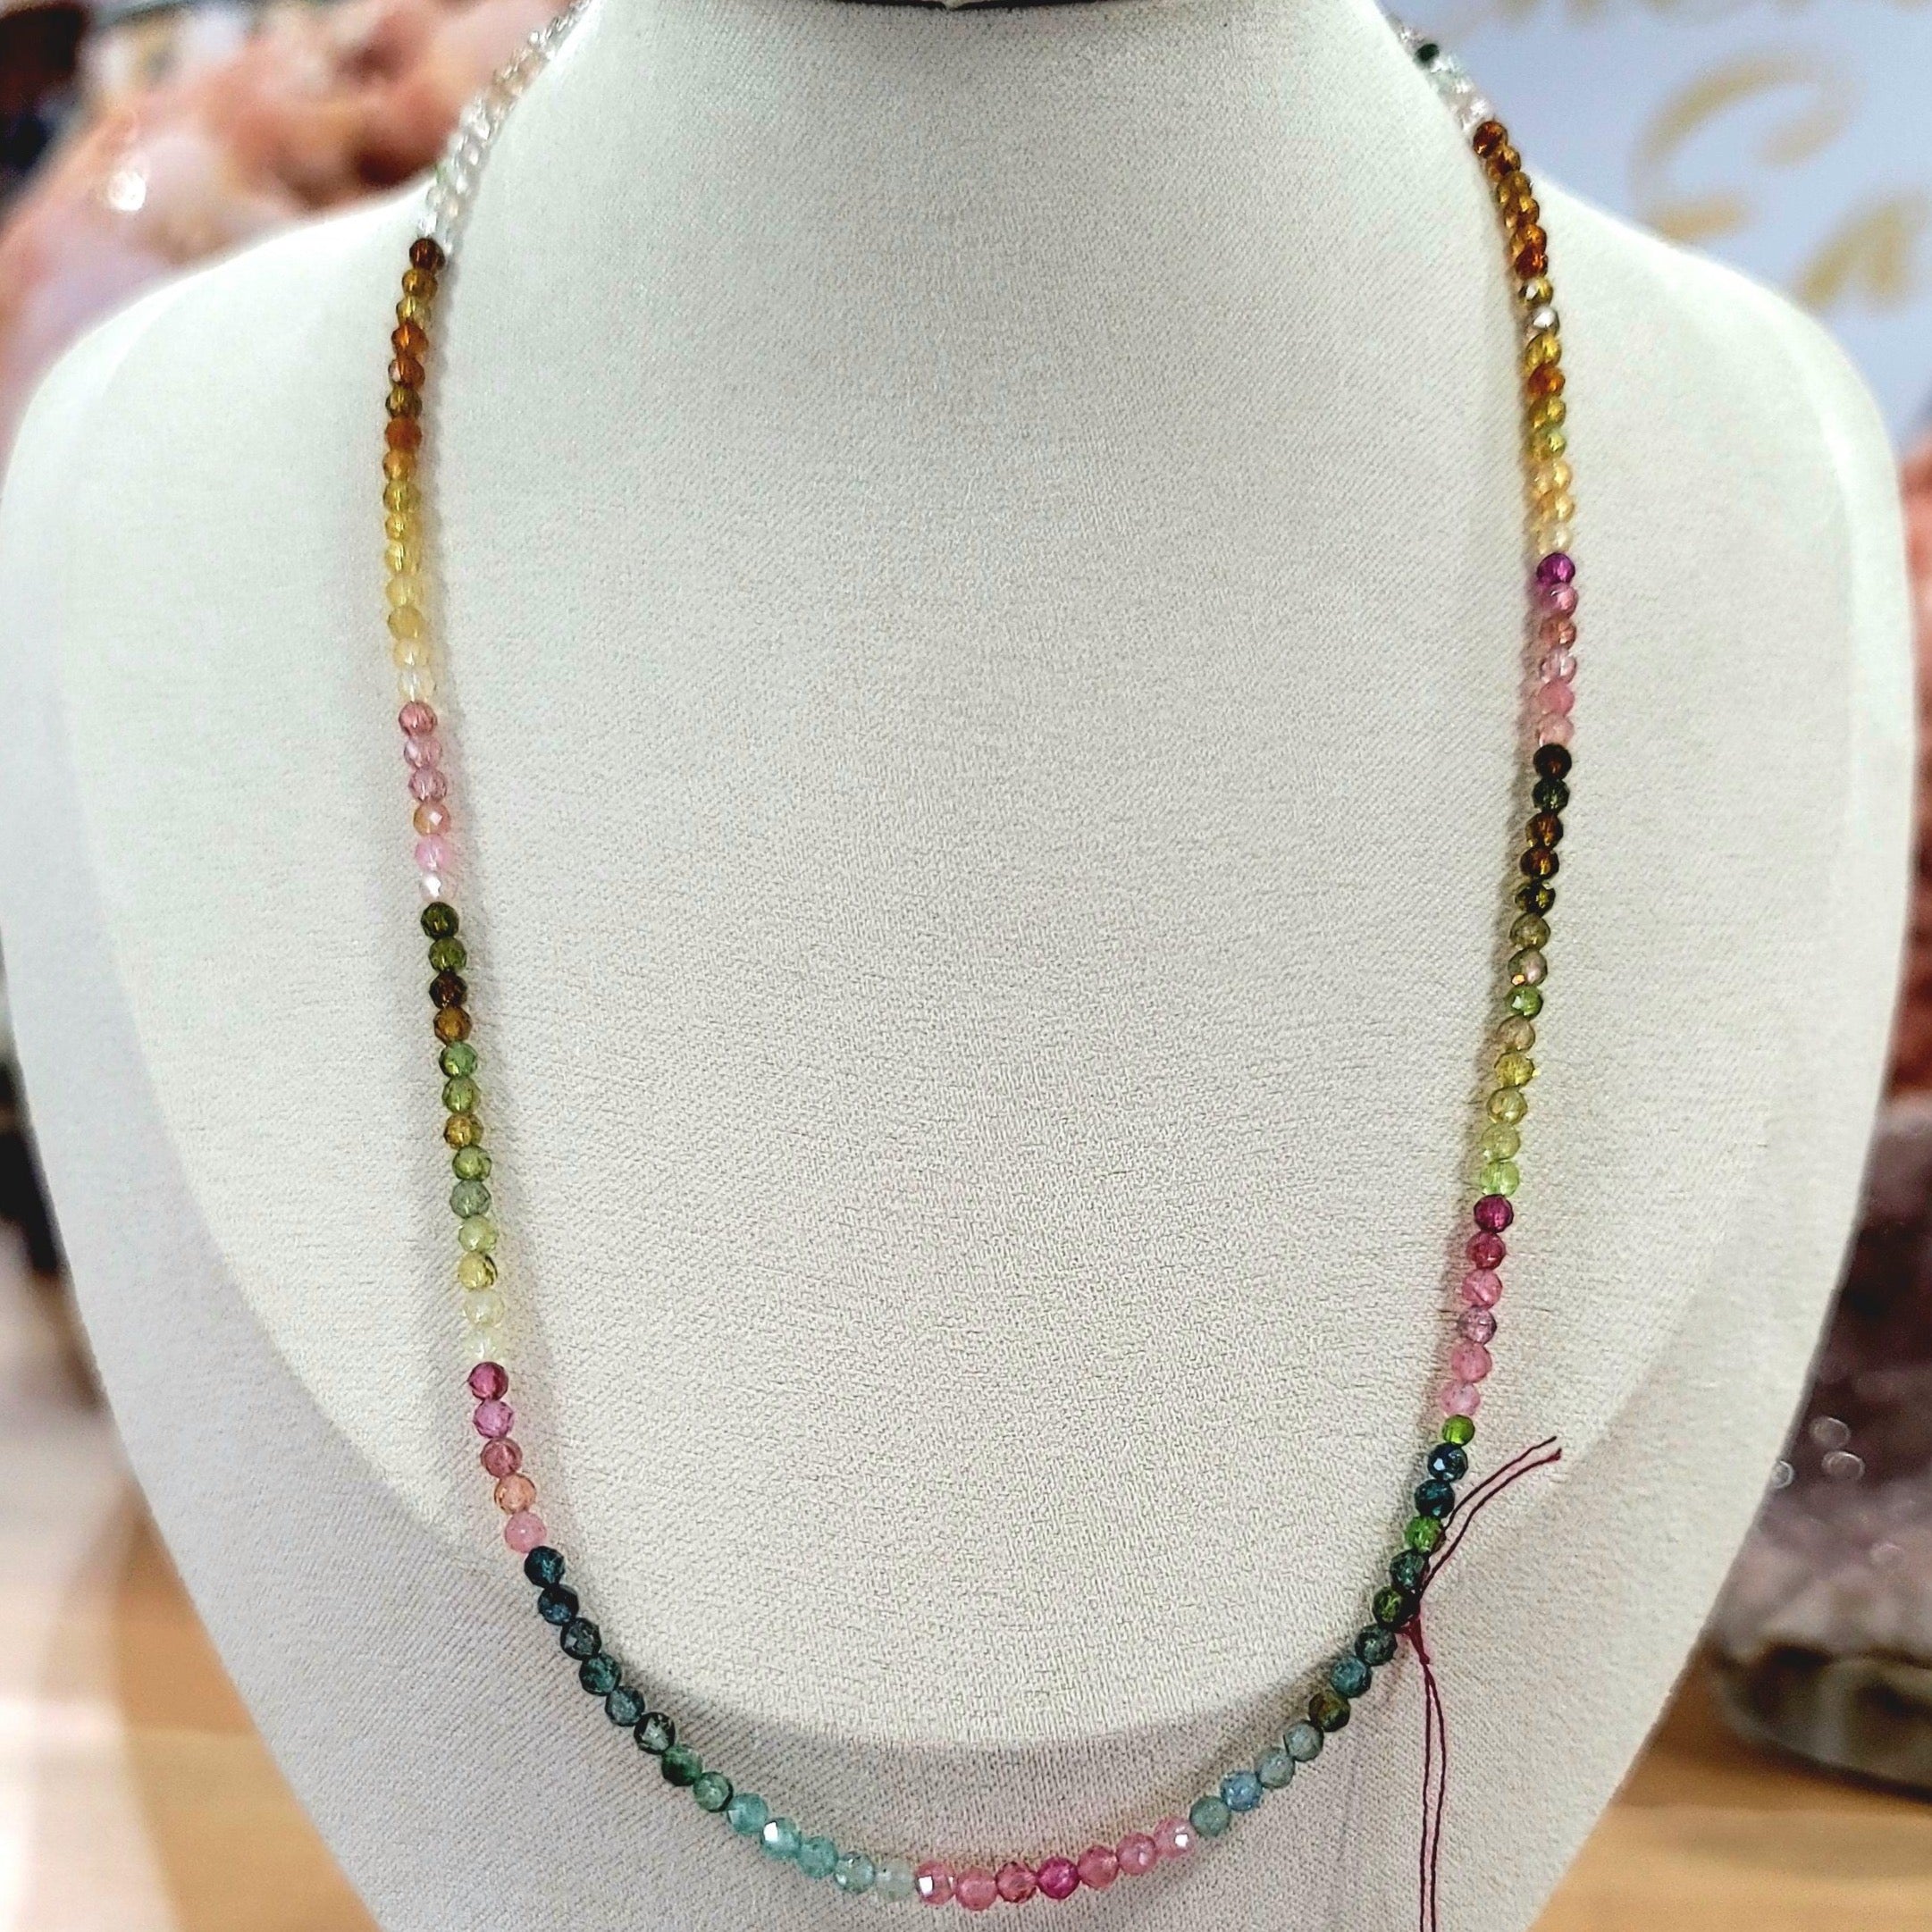 Watermelon Tourmaline Waterfall Micro Faceted Necklace